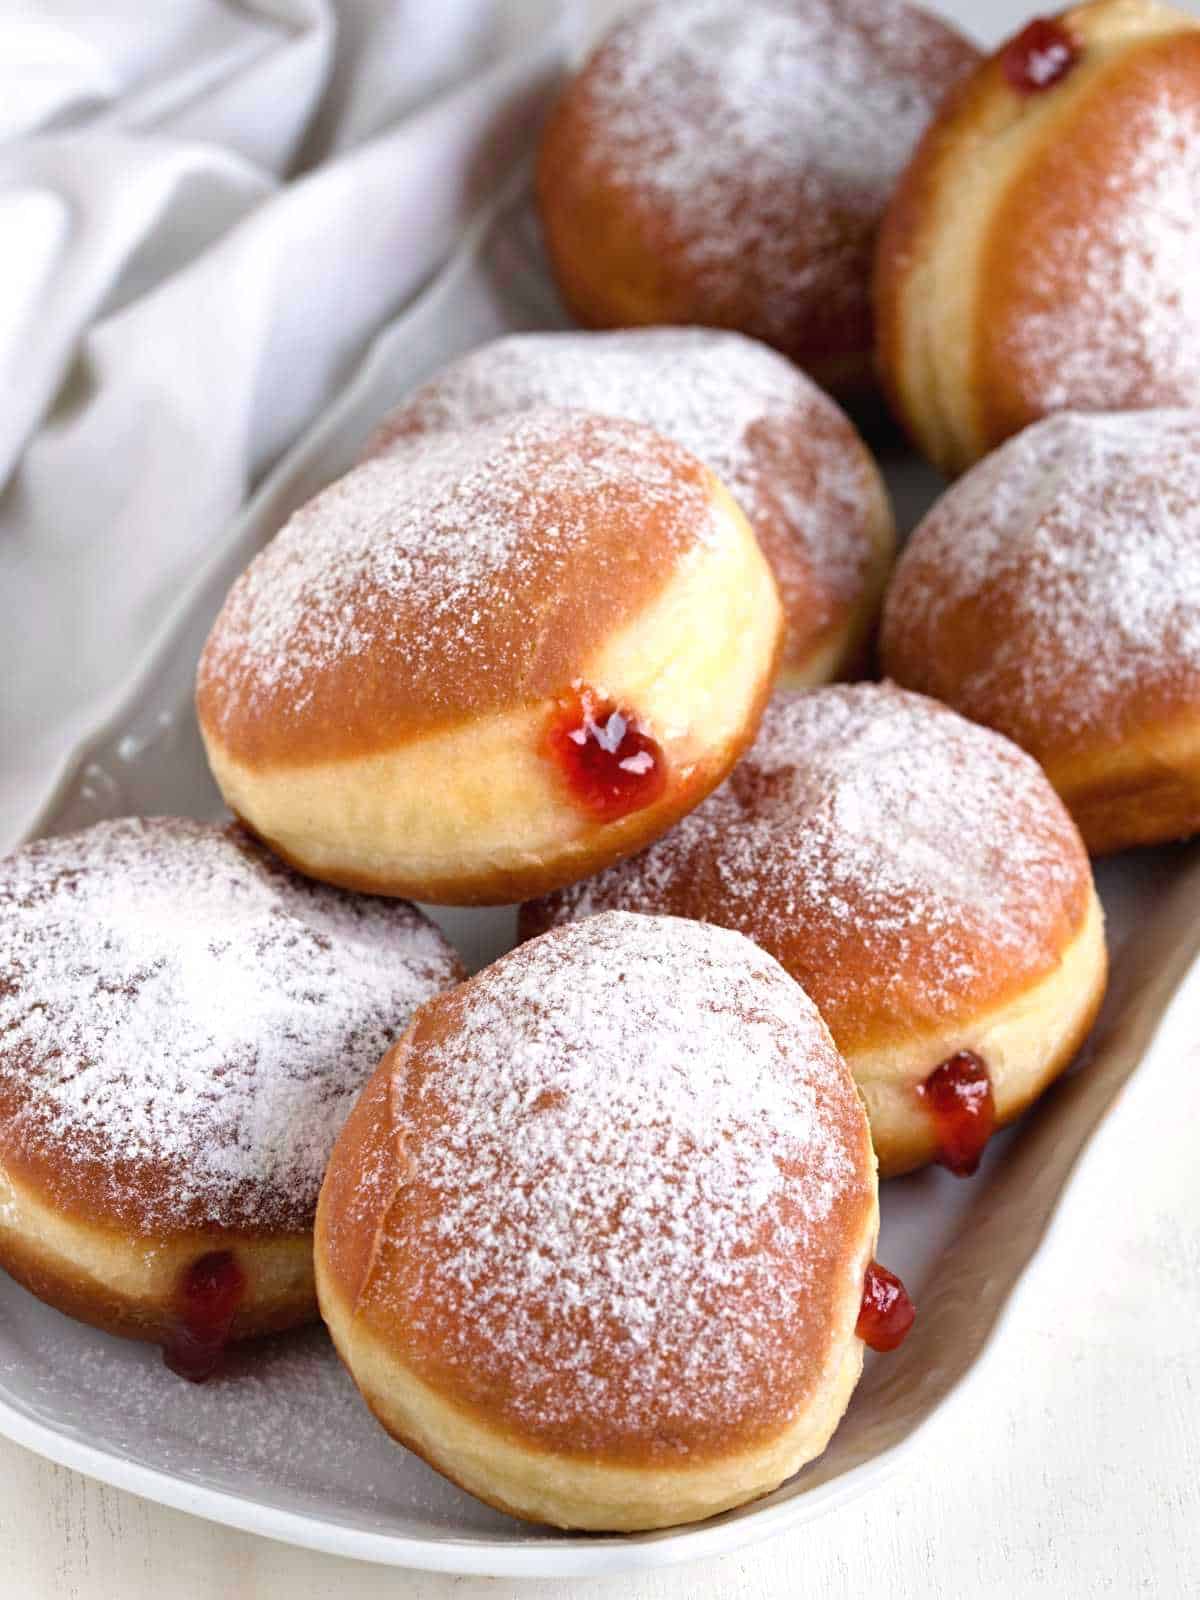 Czech koblihy dusted with icing sugar and filled with jam.